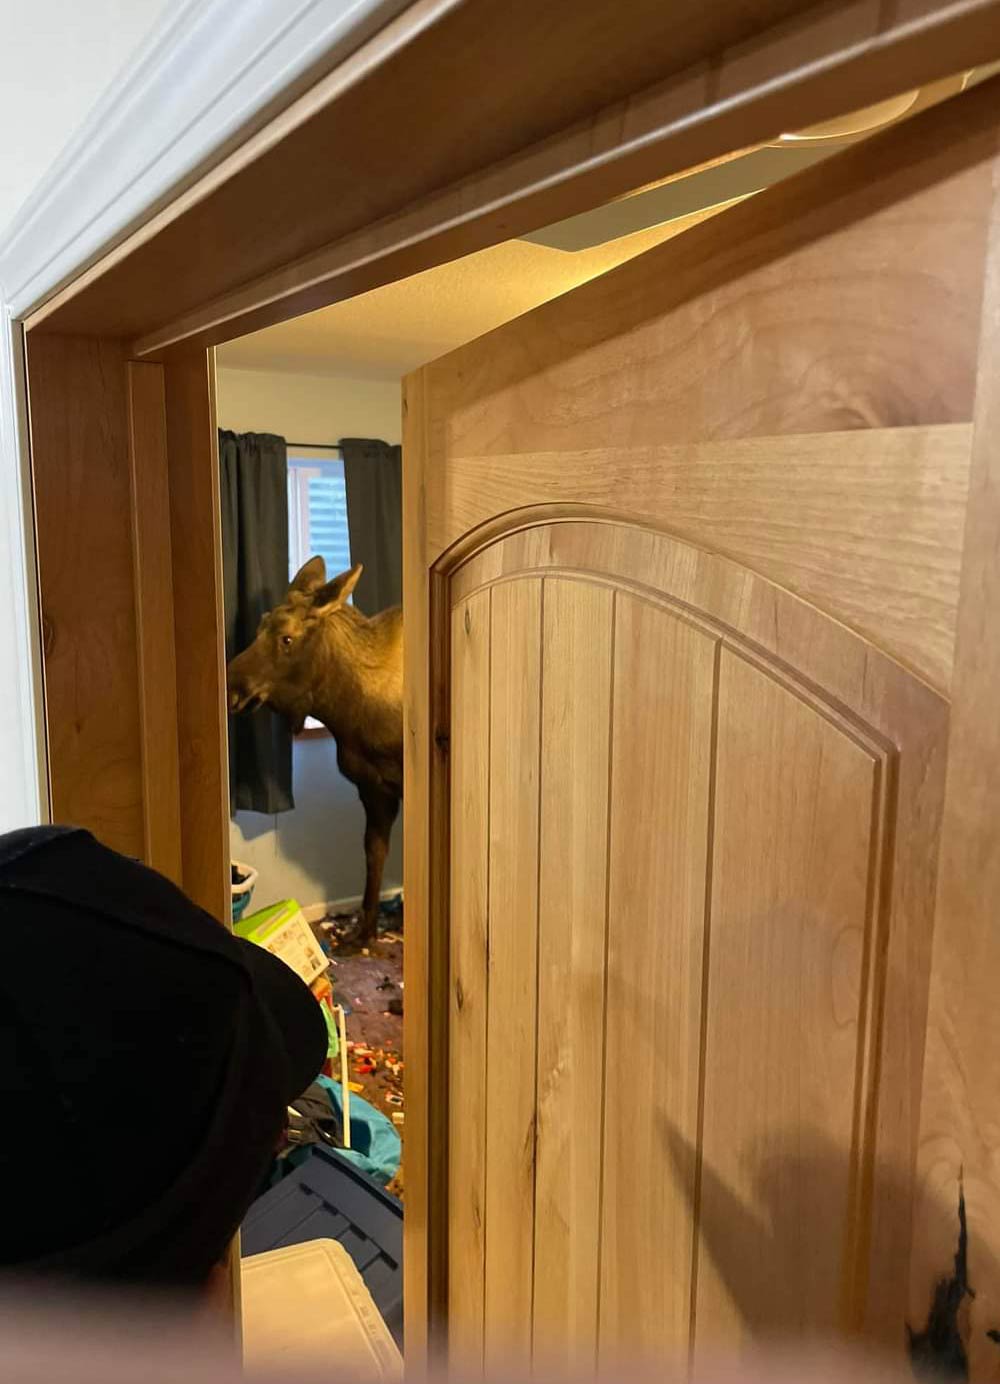 A moose in Alaska broke a window and wound up in a home basement today